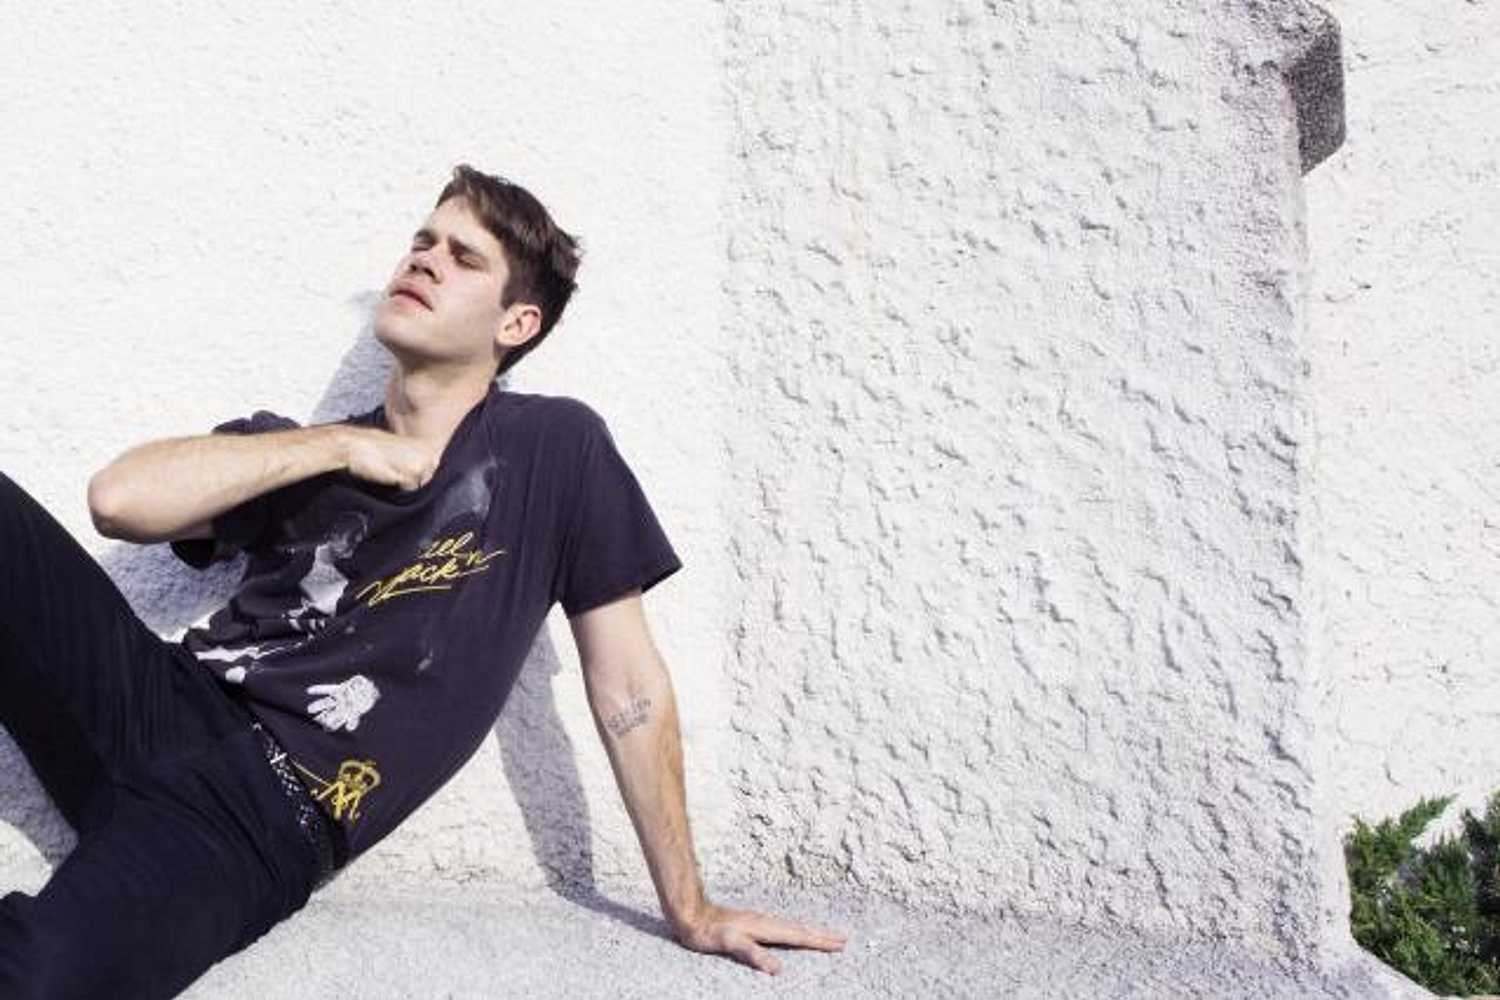 Porches signs to Domino, shares ‘Hour’ track